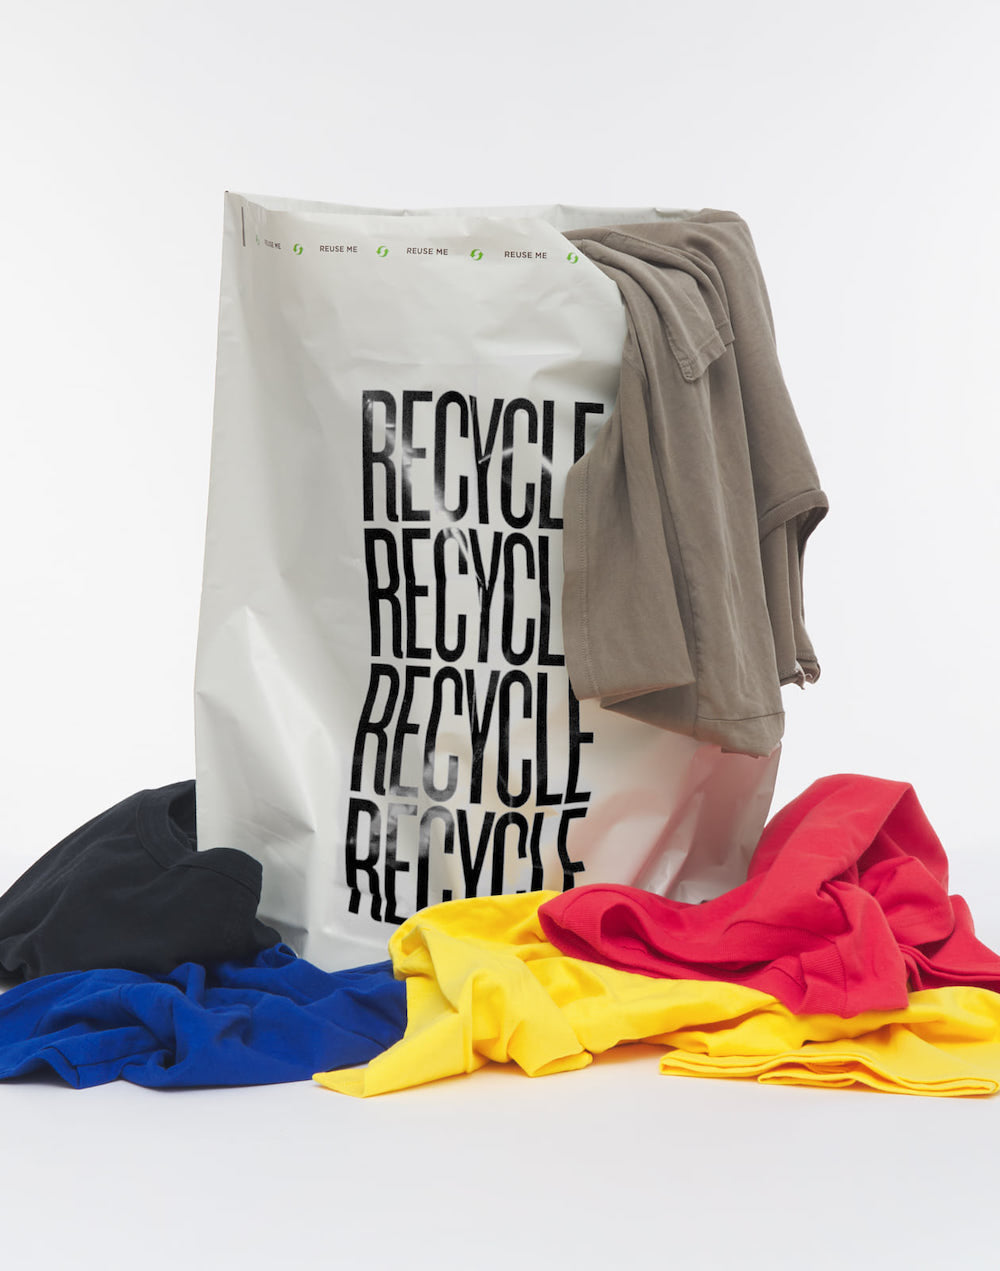 The @For Days Take Back Bag is my favorite way to get rid of old cloth, Clothes